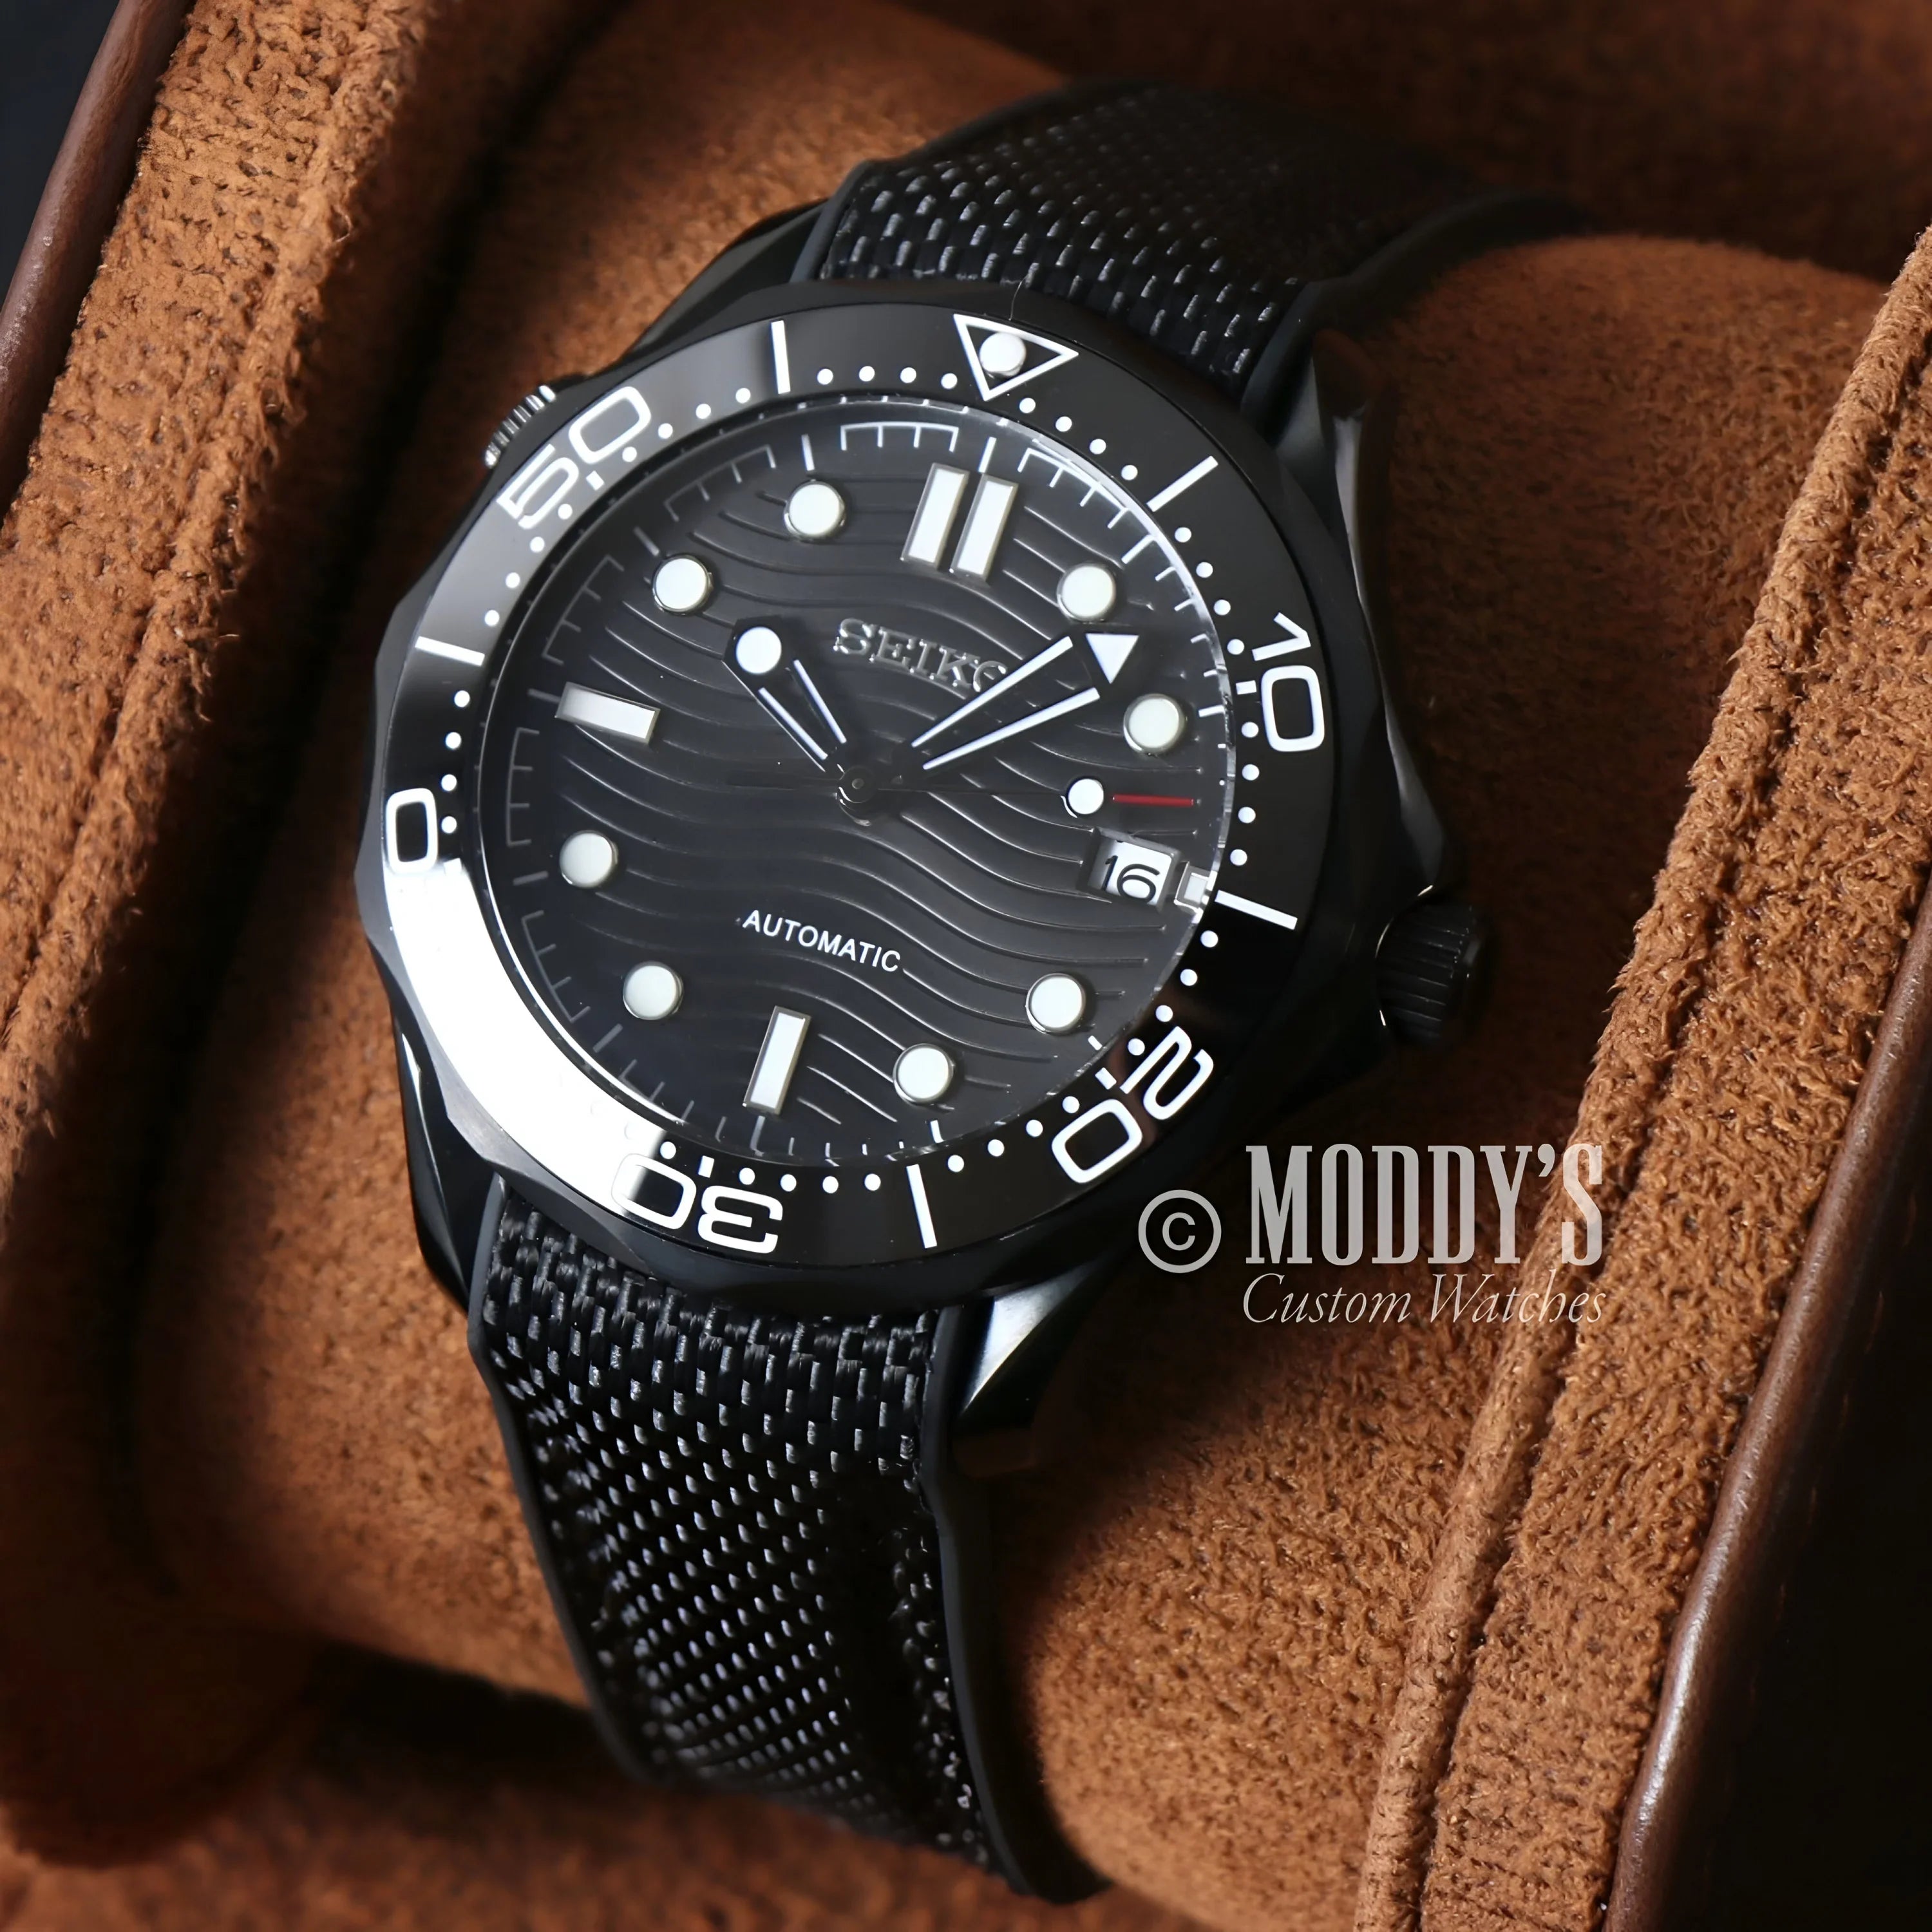 Seikomaster Full Black Watch With Black Dial And Strap, Automatic Nh35 Movement